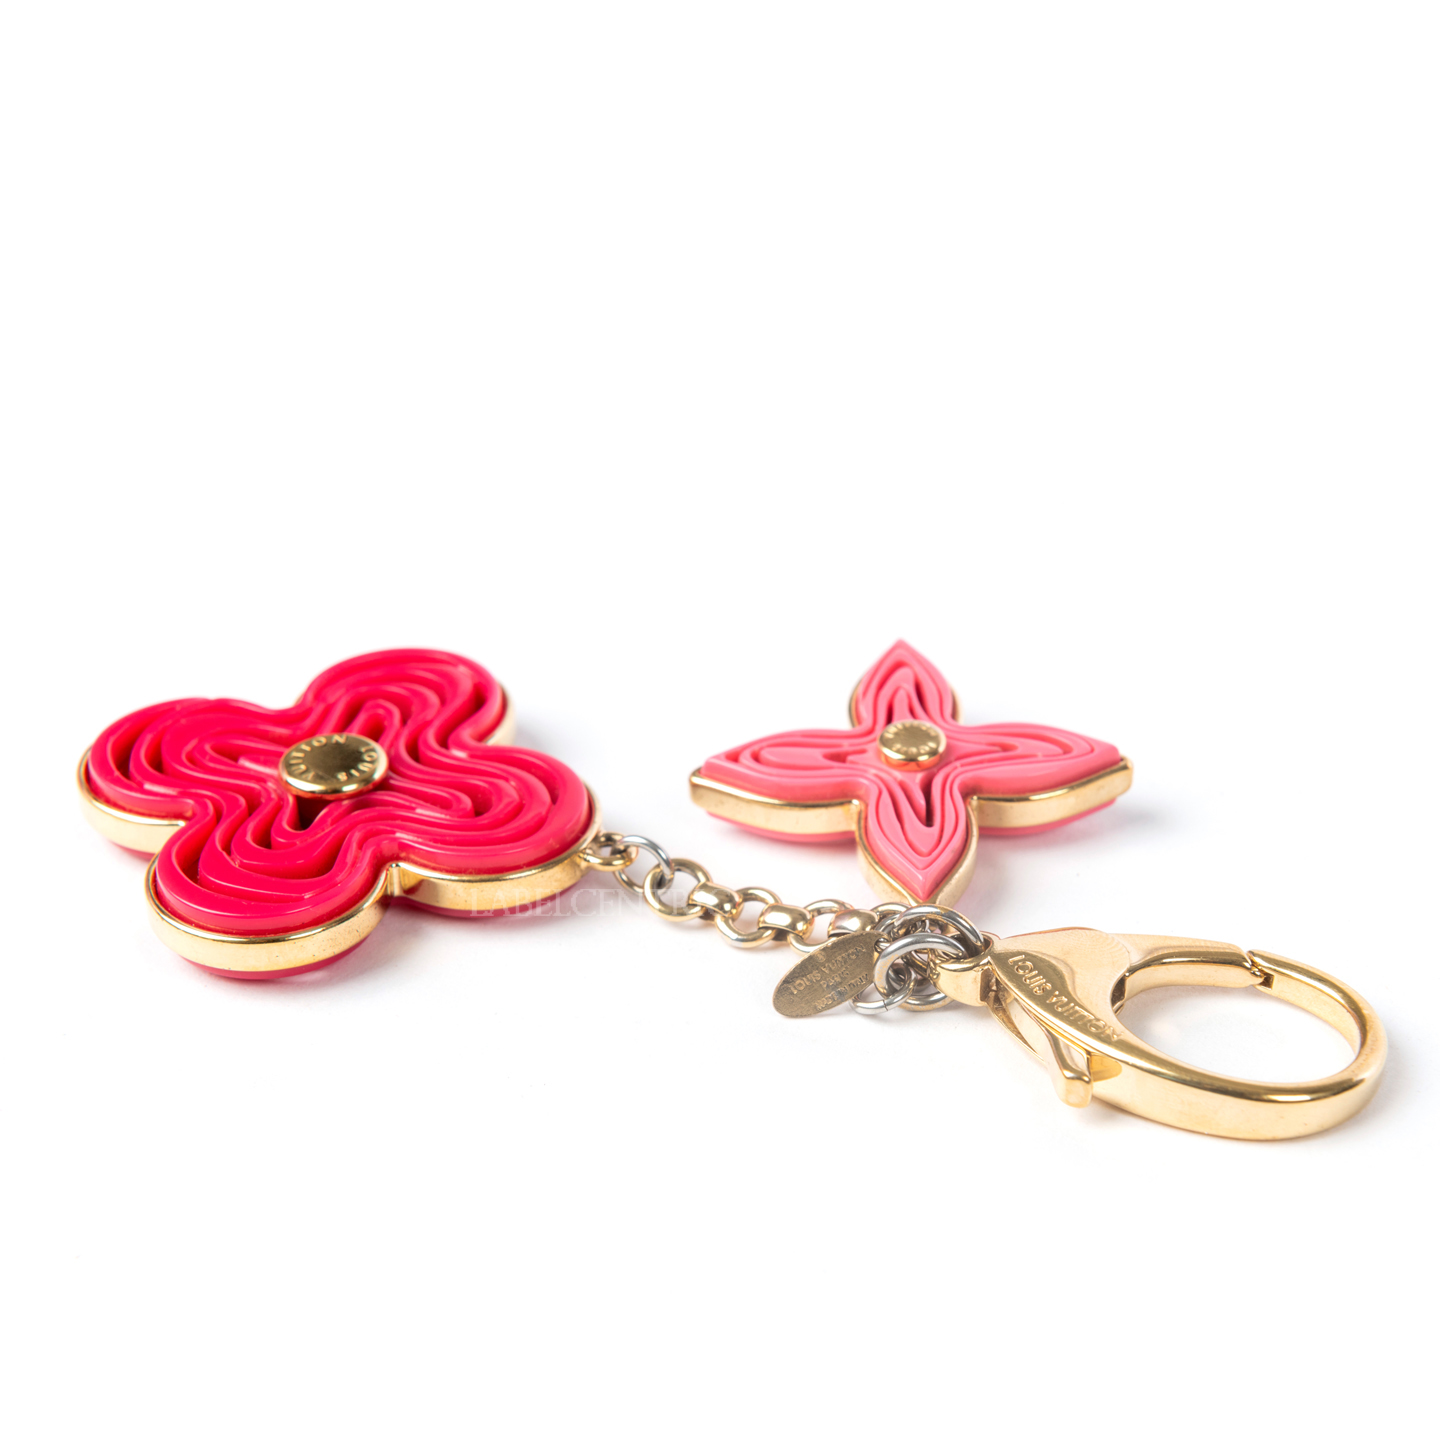 Louis Vuitton Pink Resin Naif Key Holder and Bag Charm - LabelCentric